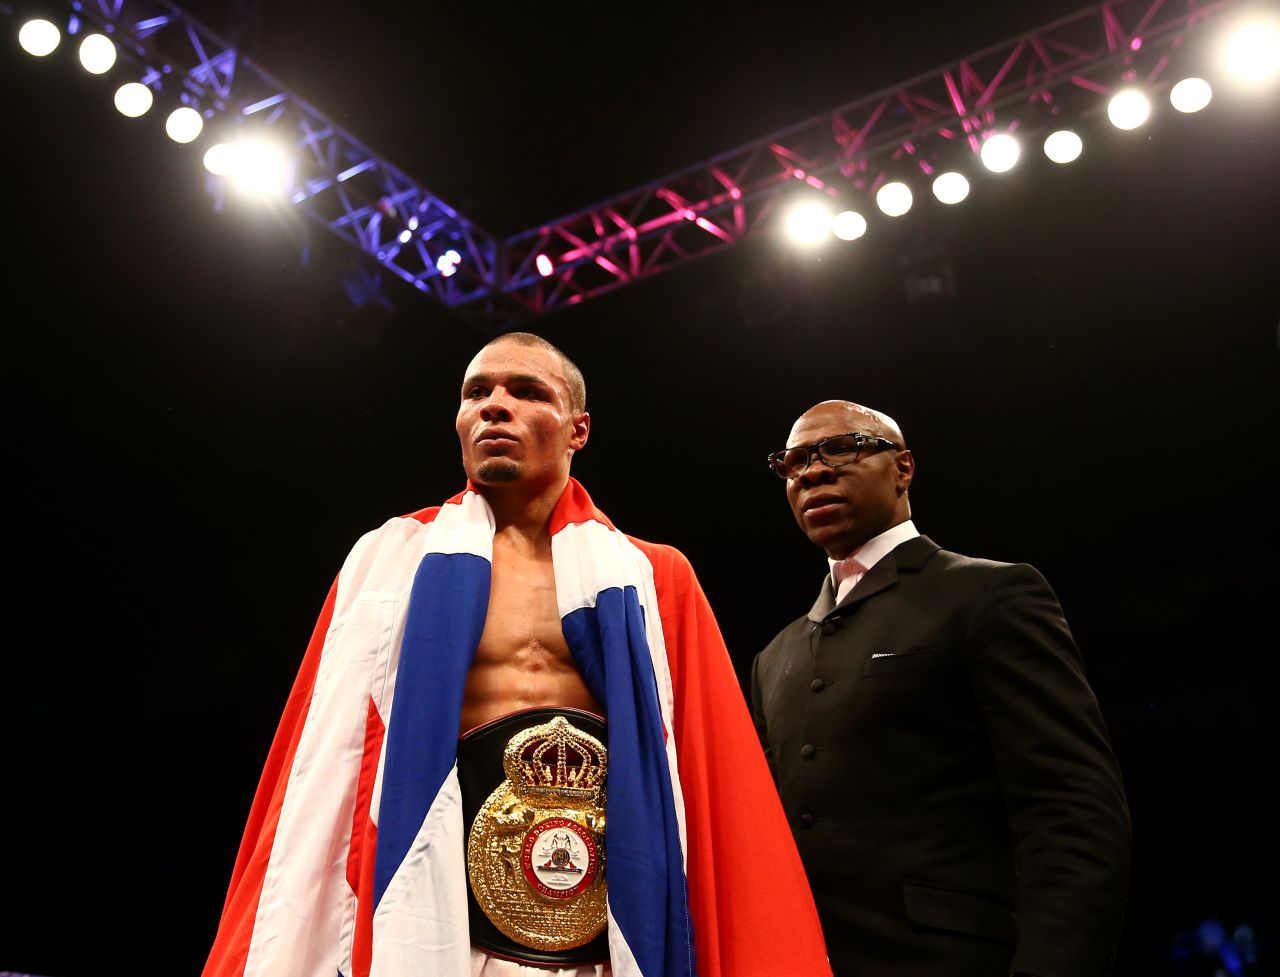 Eubank Jr. took the British Middleweight title in London last month. The referee stopped the fight in the tenth round after opponent Nick Blackwell's face became so swollen he couldn't see out of his left eye. Blackwell collapsed shortly after and was put into an induced coma. He regained consciousness seven days later and is now recovering. <br />"As two fighters, we go in there and fight for pride and a title," said Eubank Jr. of the fight. "At the end of the day there's no malice or hatred. It's a sport. <br />"I gained so much respect for him (Blackwell) after that fight -- he's a true warrior."